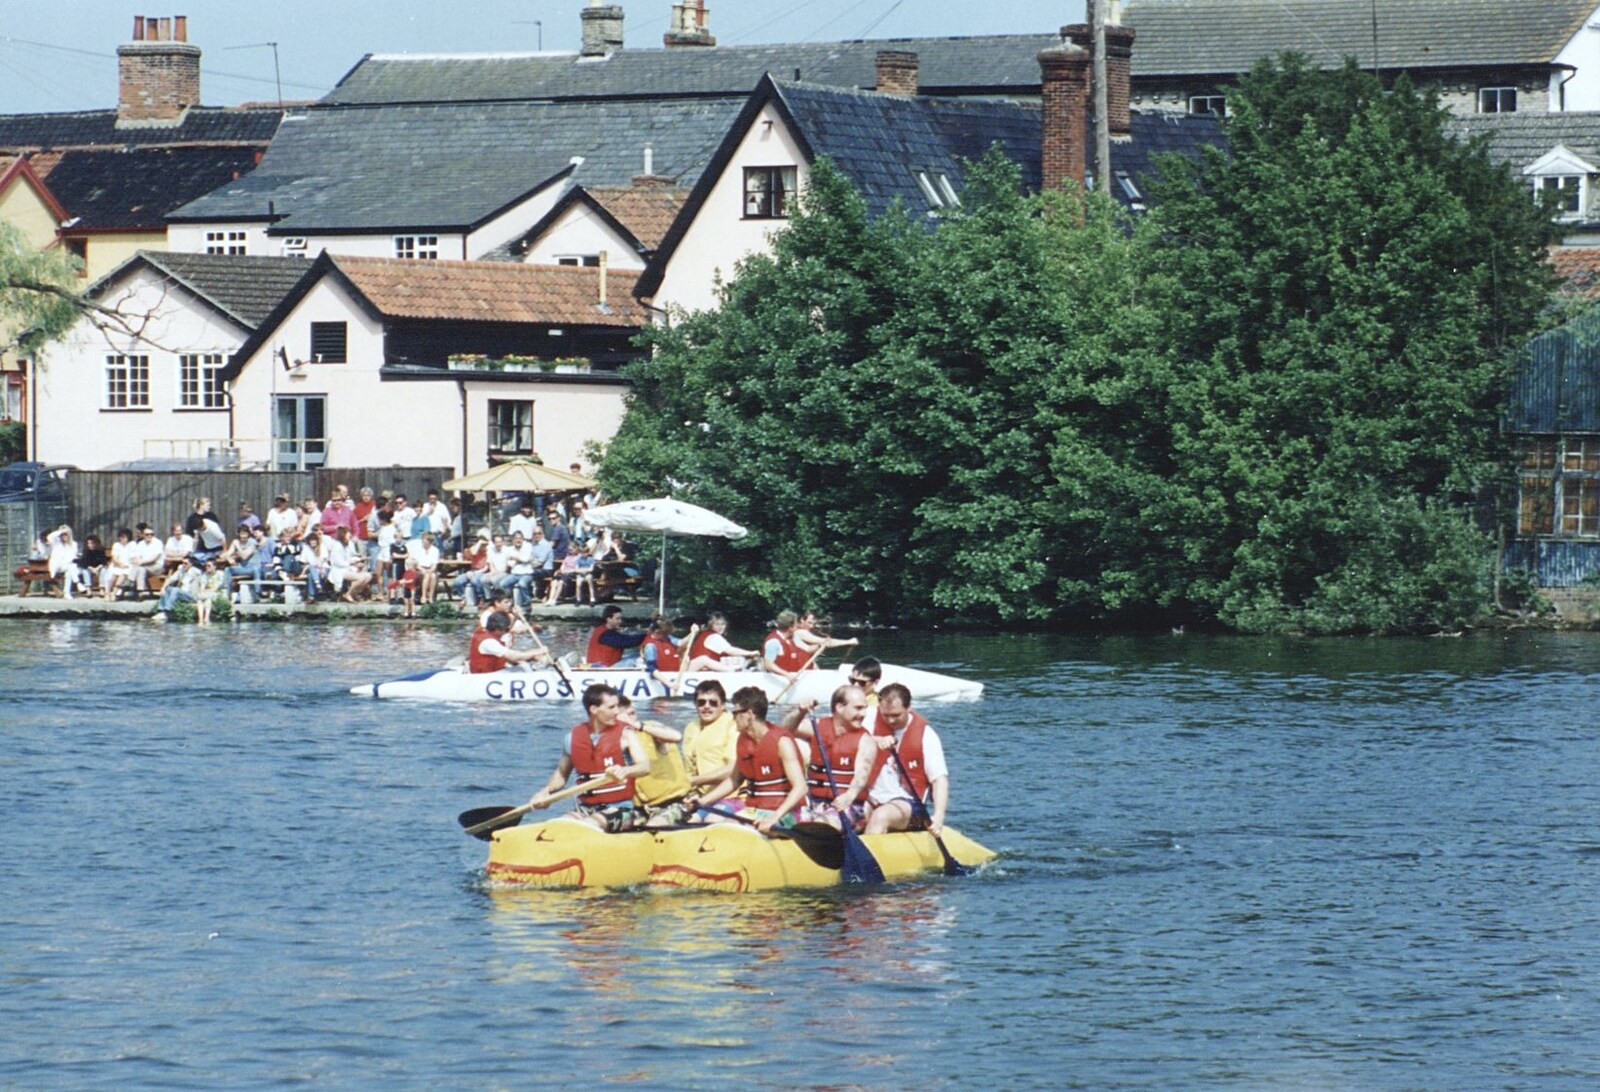 The yellow catamaraft is still going from A Raft Race on the Mere, Diss, Norfolk - 2nd June 1990